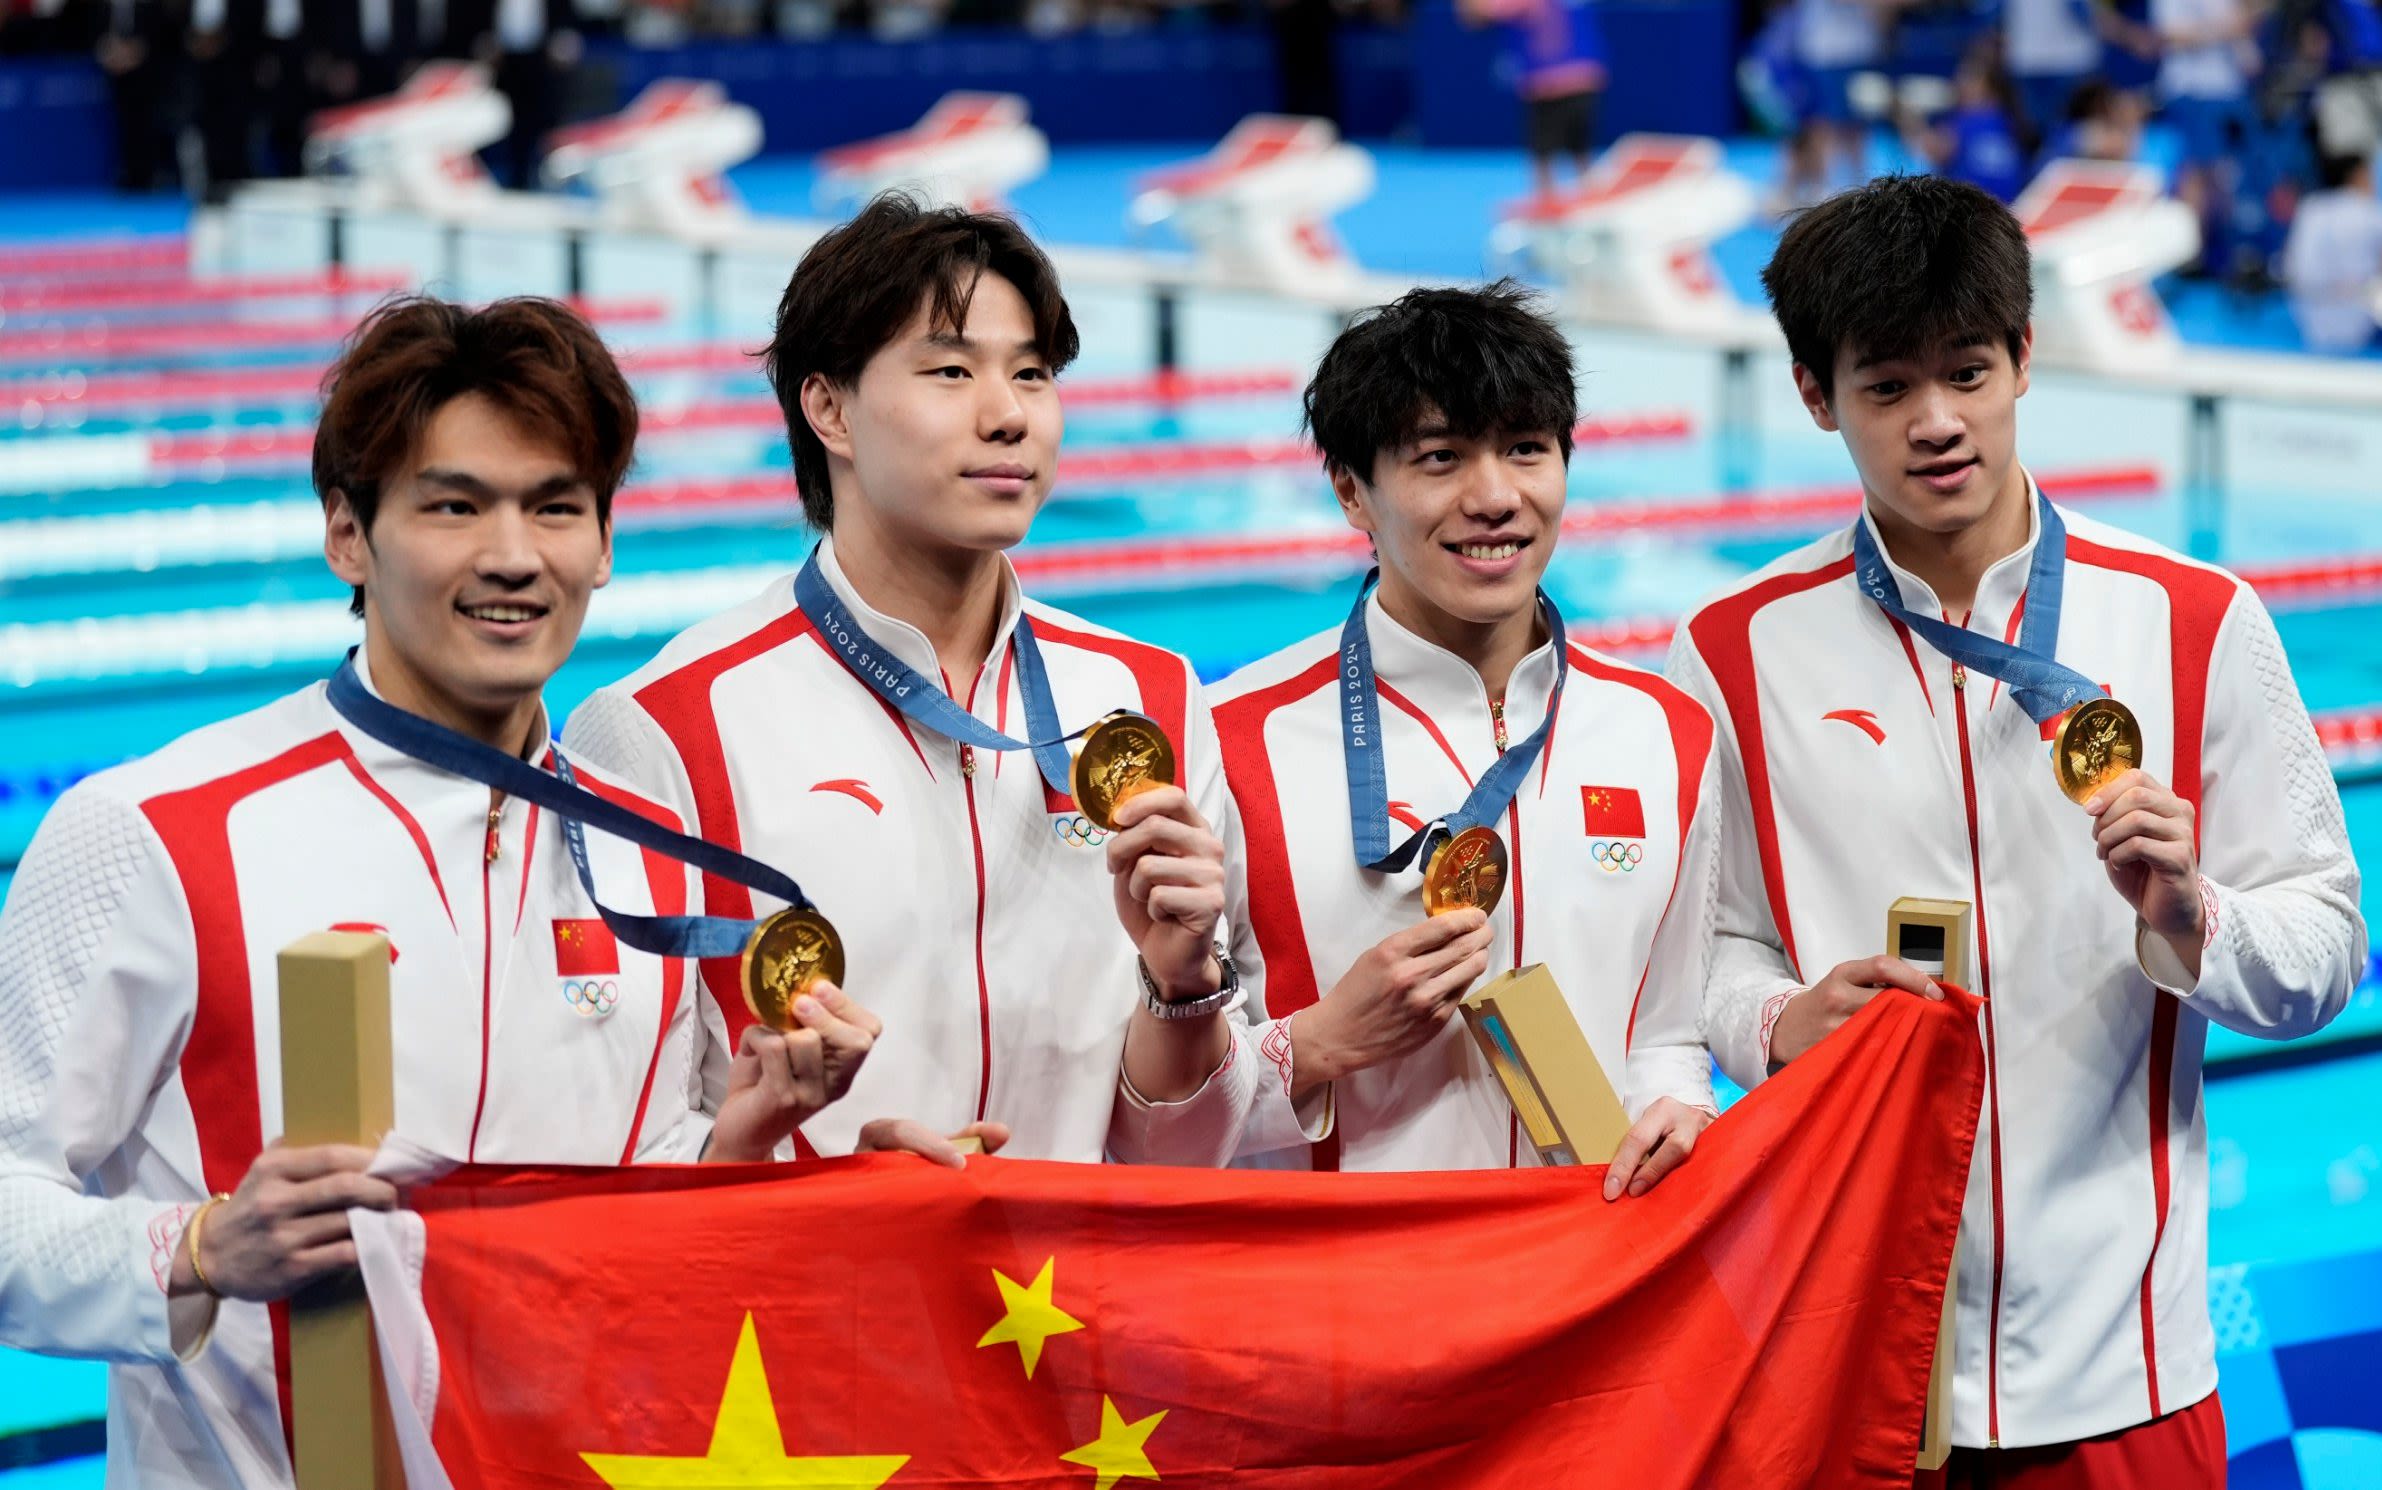 China doping row: Who said what, how it unfolded and the medals team has won